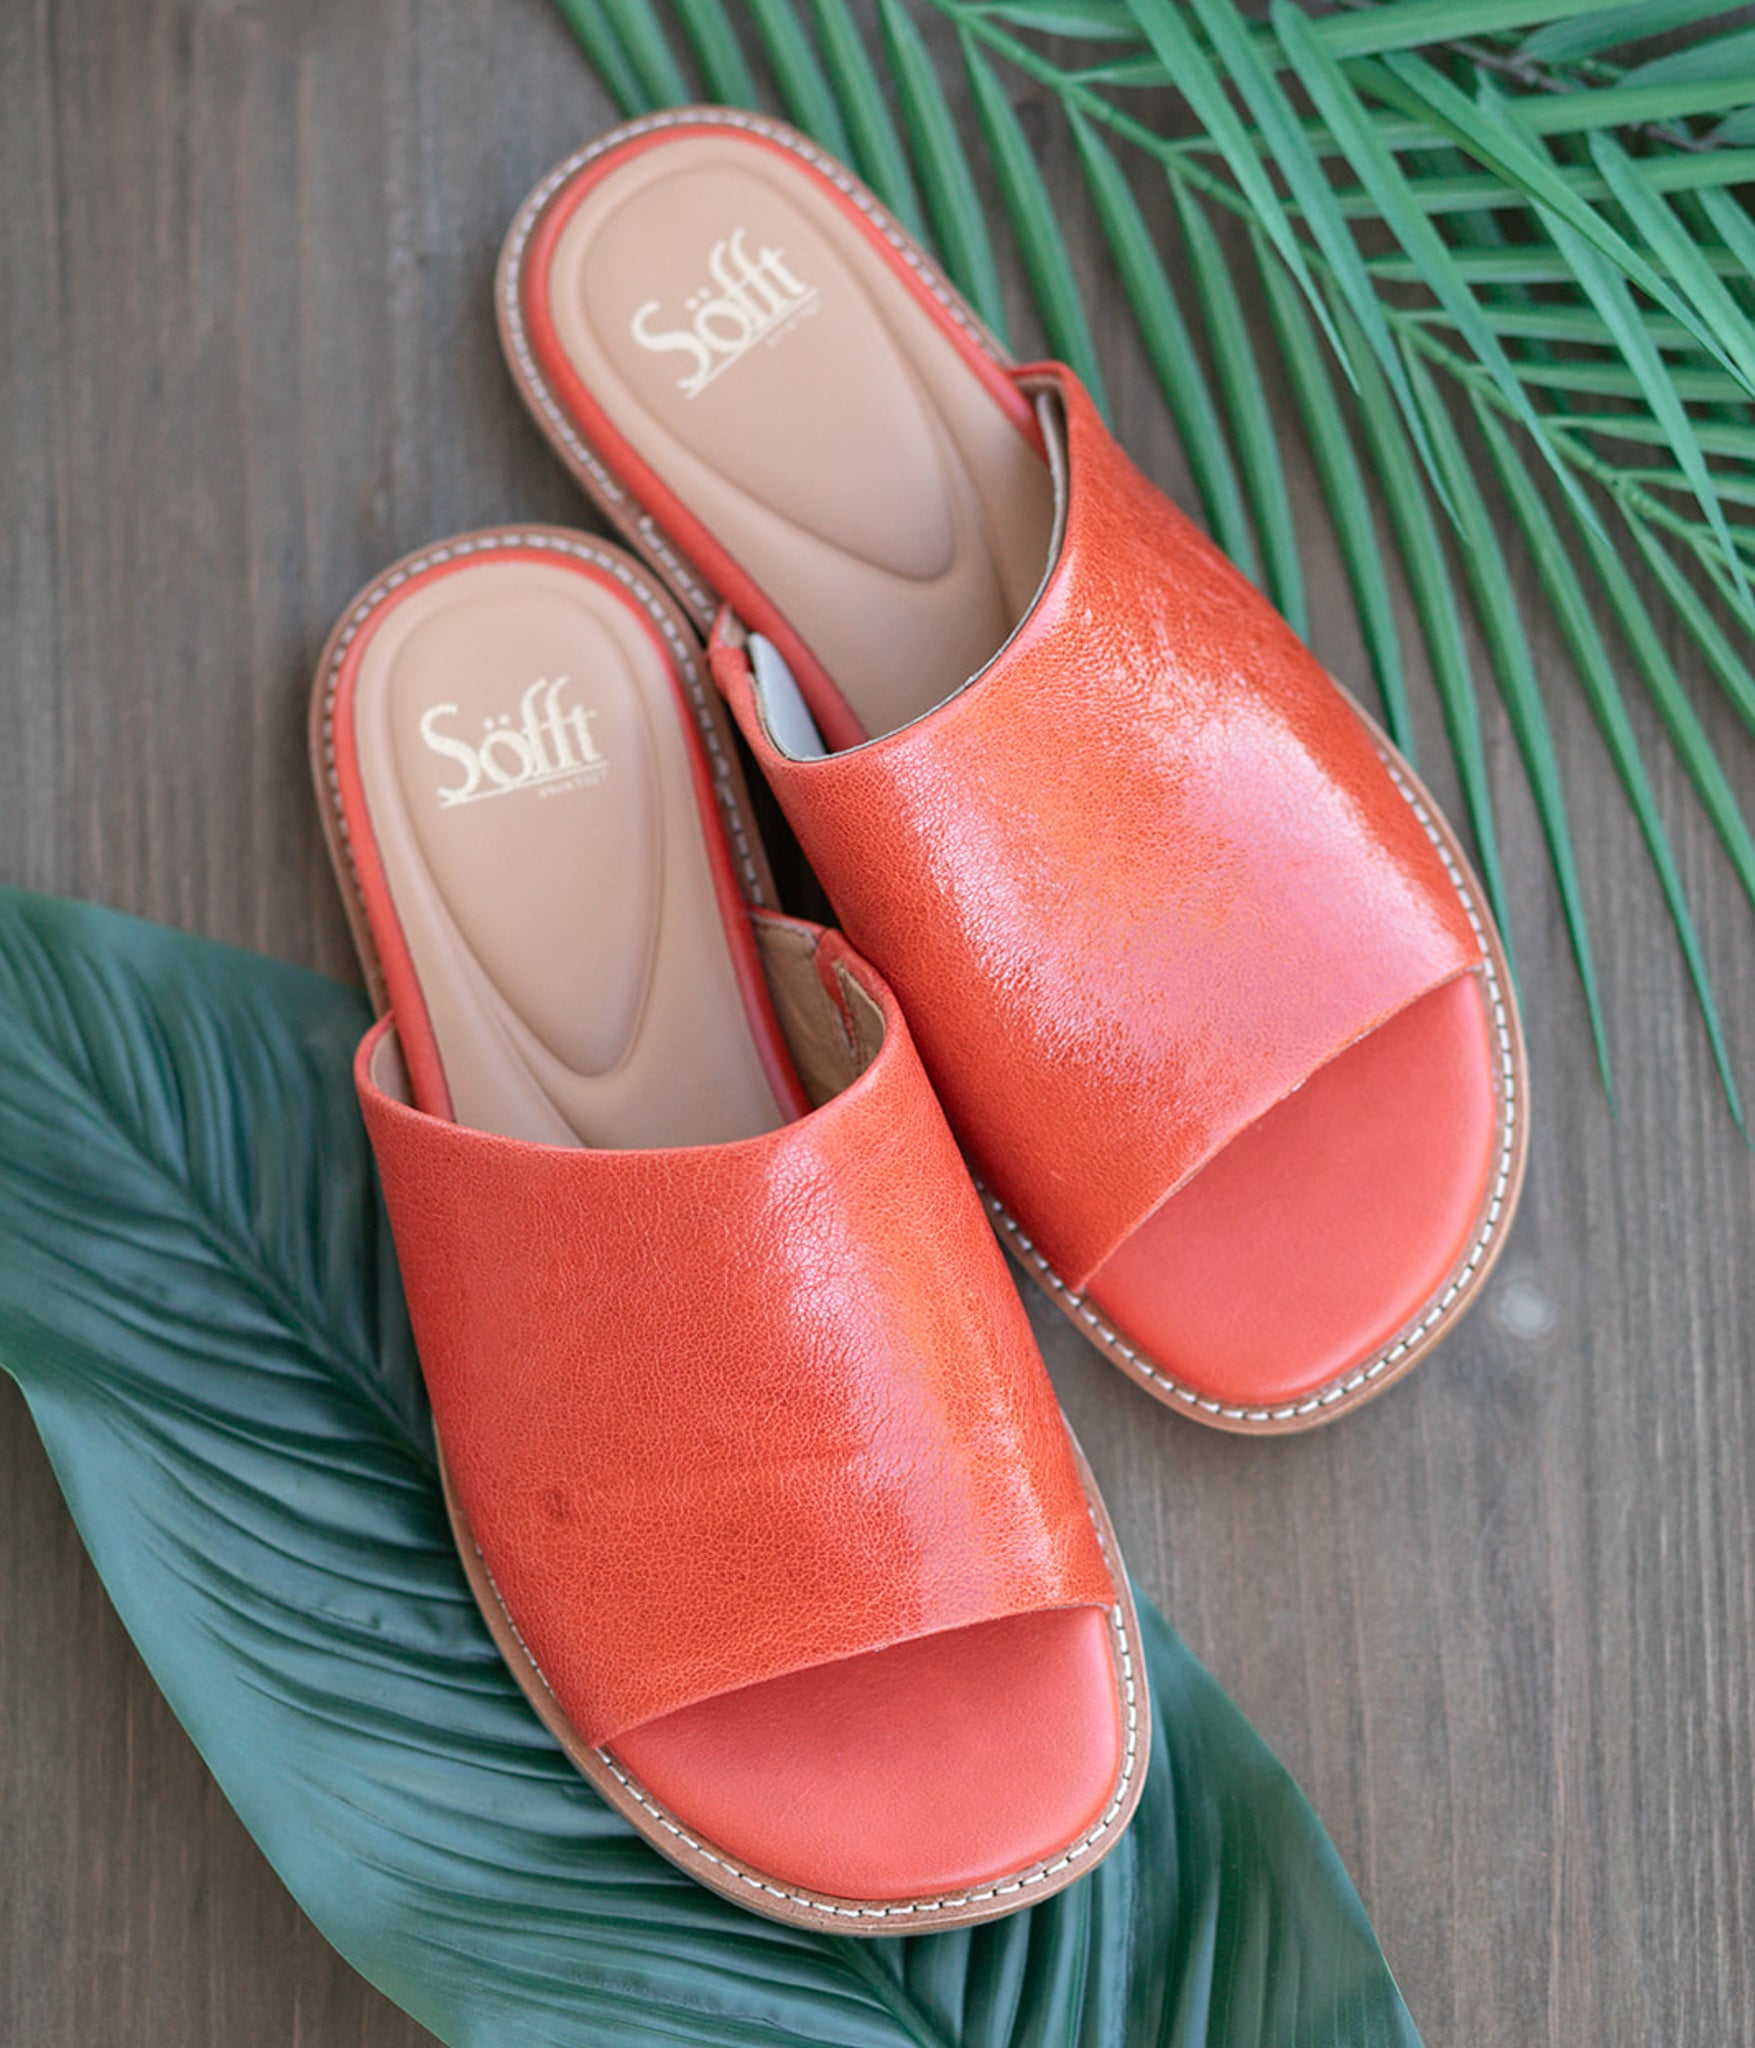 Noble Italian Leather Slide Sandals in Red Coral by Sofft Shoes